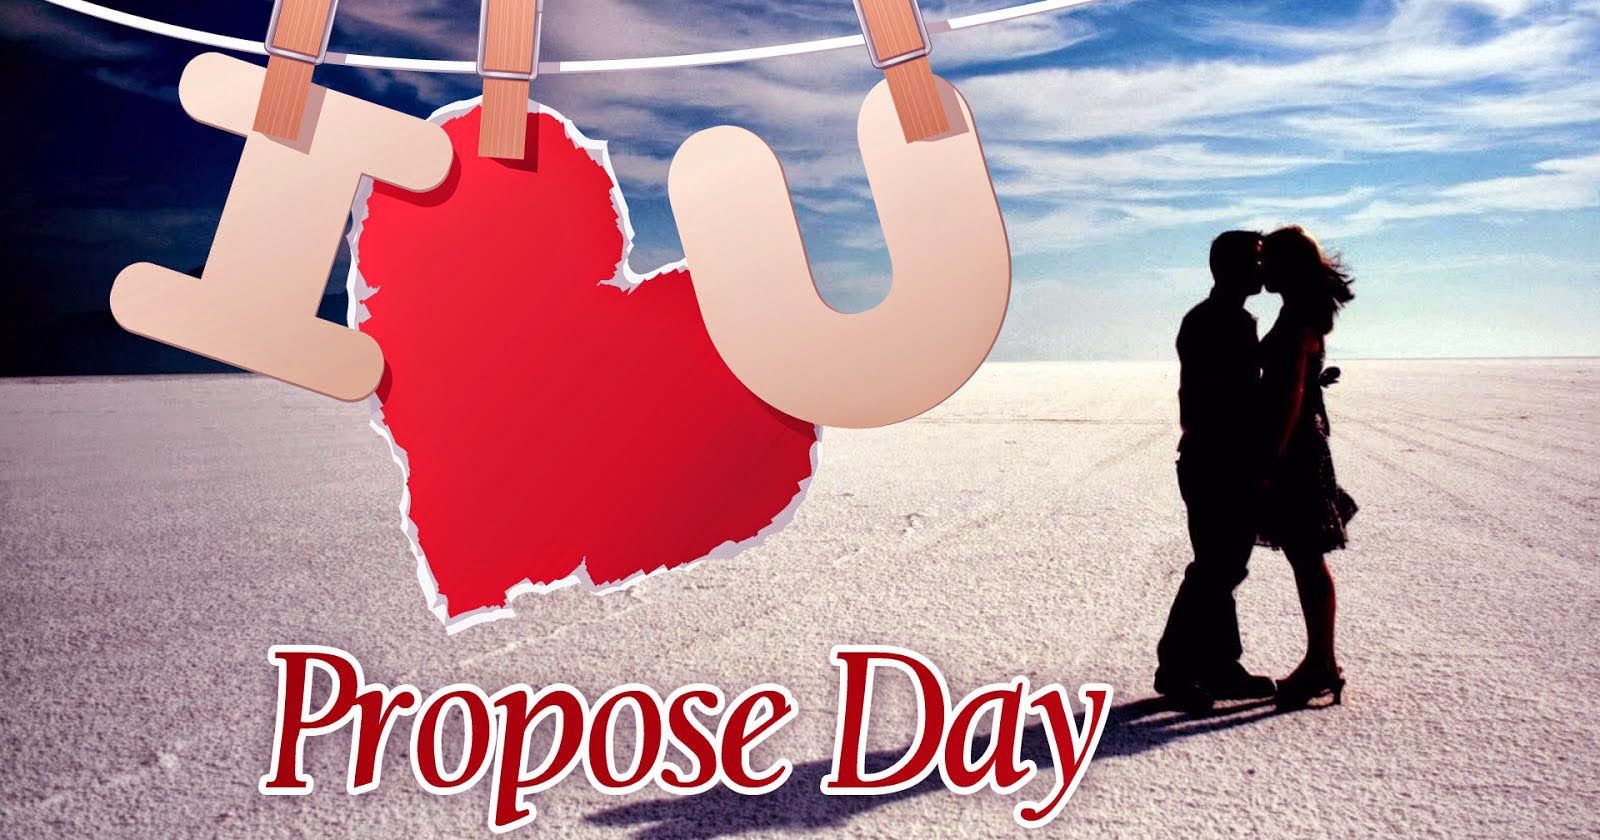 HD All Wallpaper: I Love You Propose Day New Image For Gf Bf